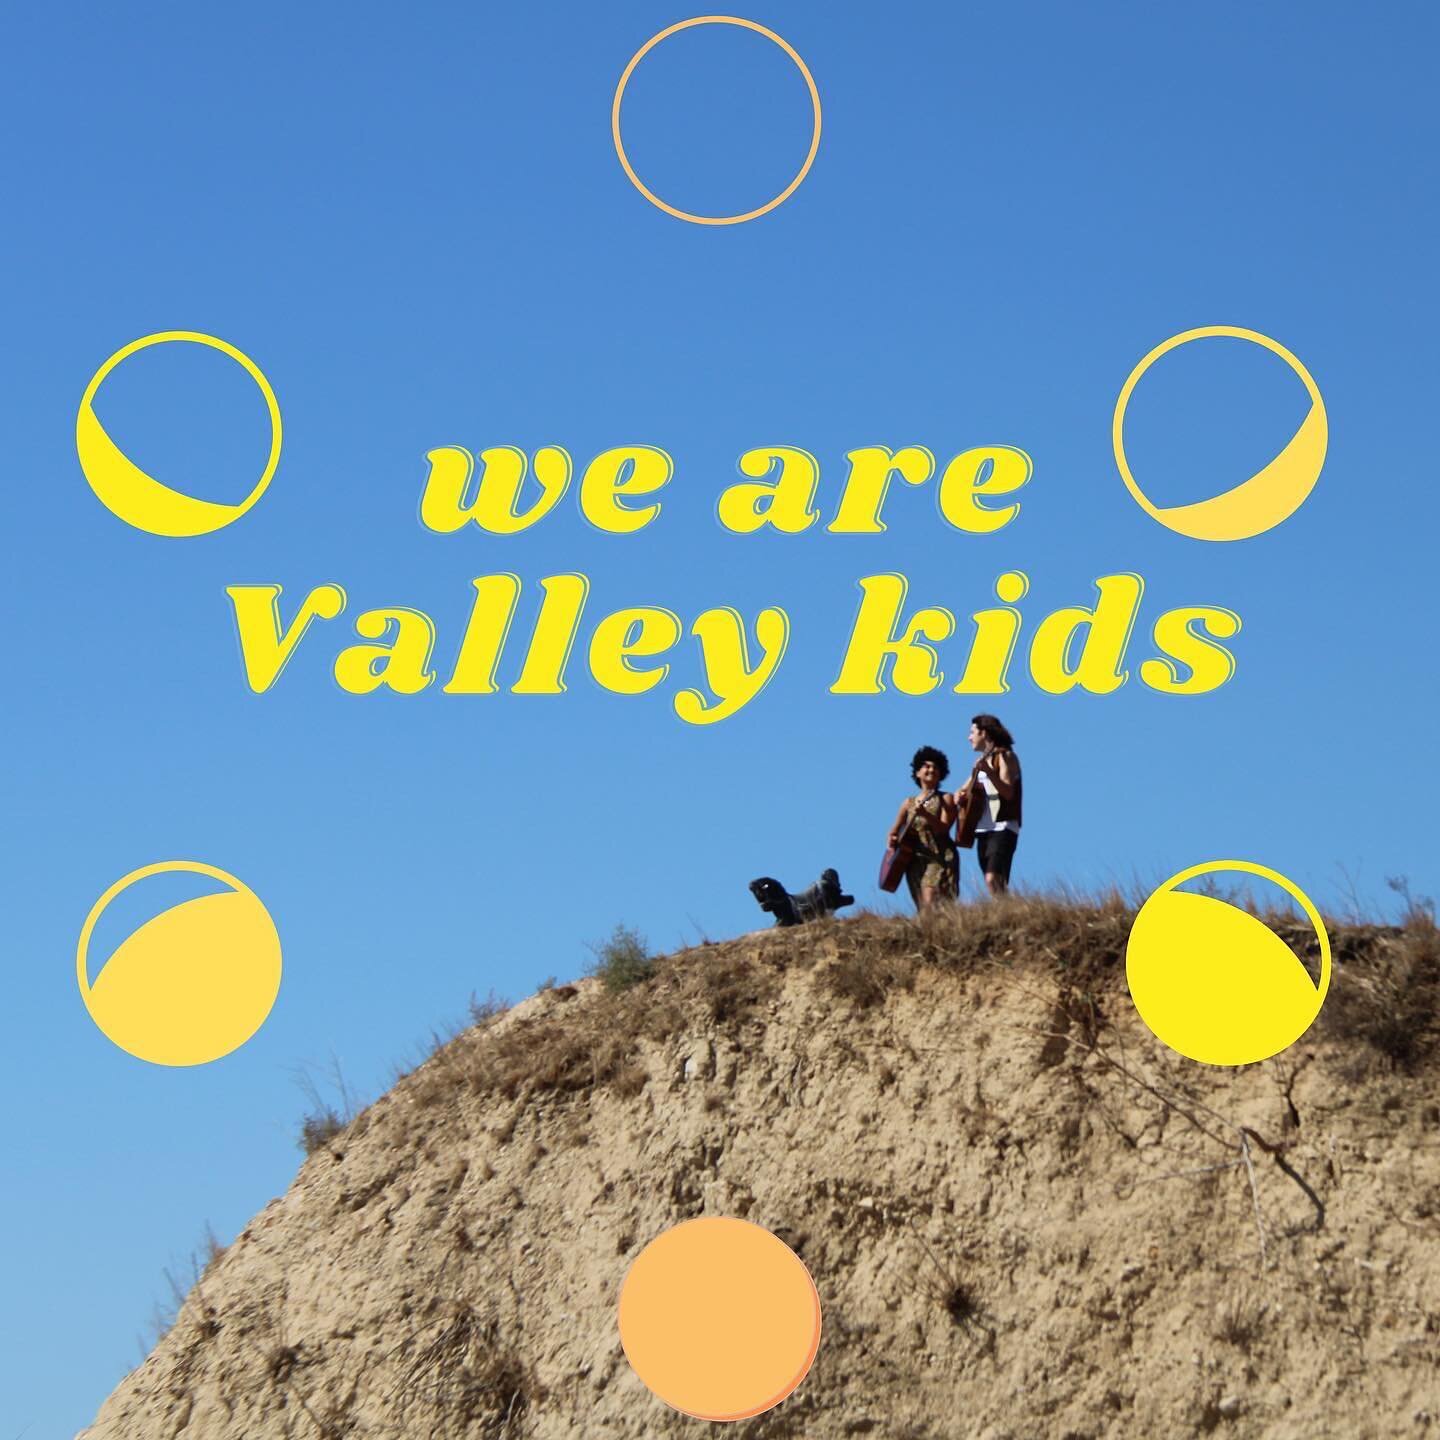 we are Ruby &amp; Wes, 
two kids from the Valley 
who fell in love making music in the Valley
after setting out on bold adventures
and learning a few lessons,
we've found our way back to the Valley 
to share these songs with you 💜💚

this album is a